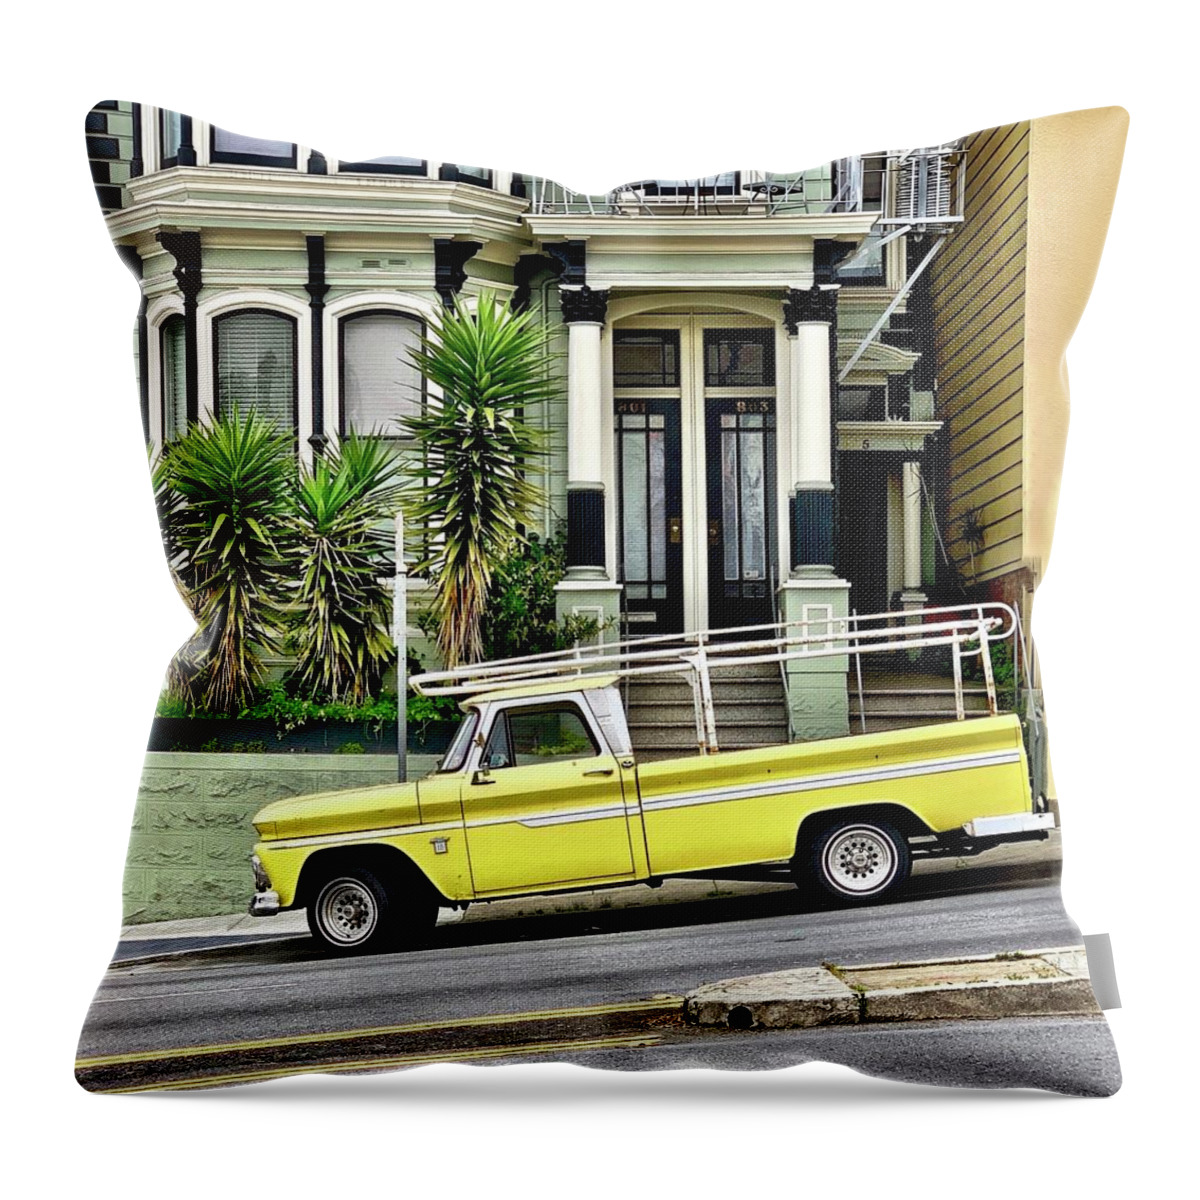  Throw Pillow featuring the photograph Yellow Truck by Julie Gebhardt